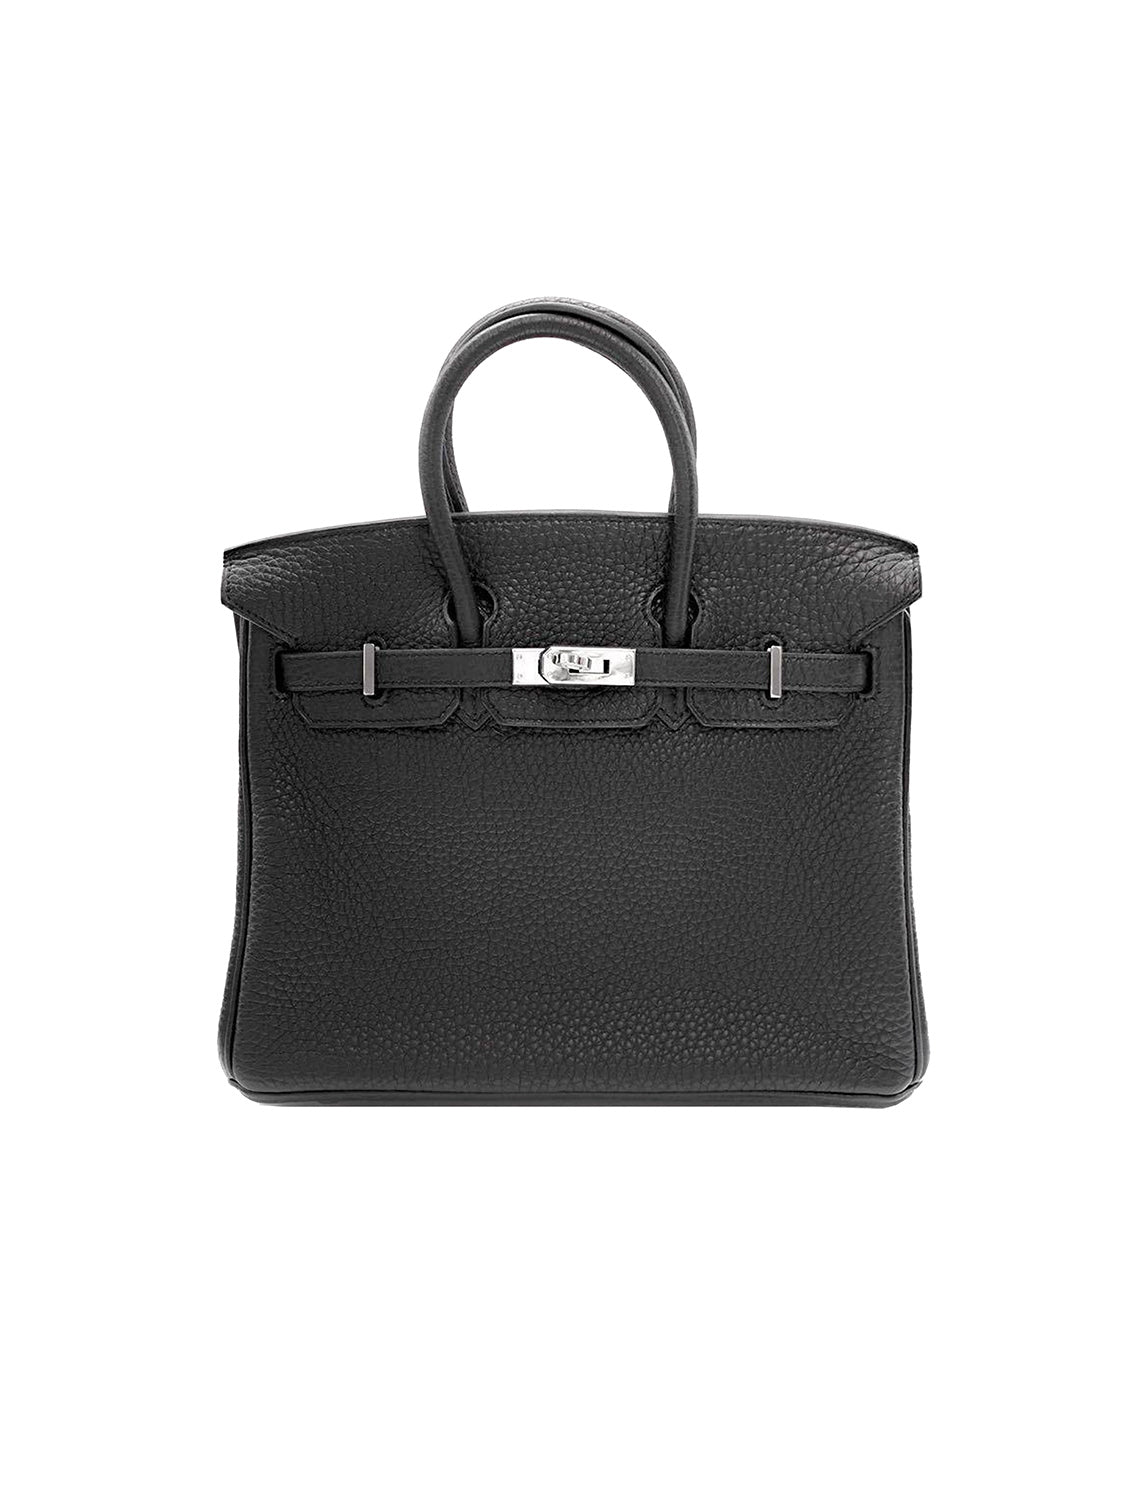 Hermes Birkin 25 Black & Silver Bag Review, Gallery posted by Sunny Brave